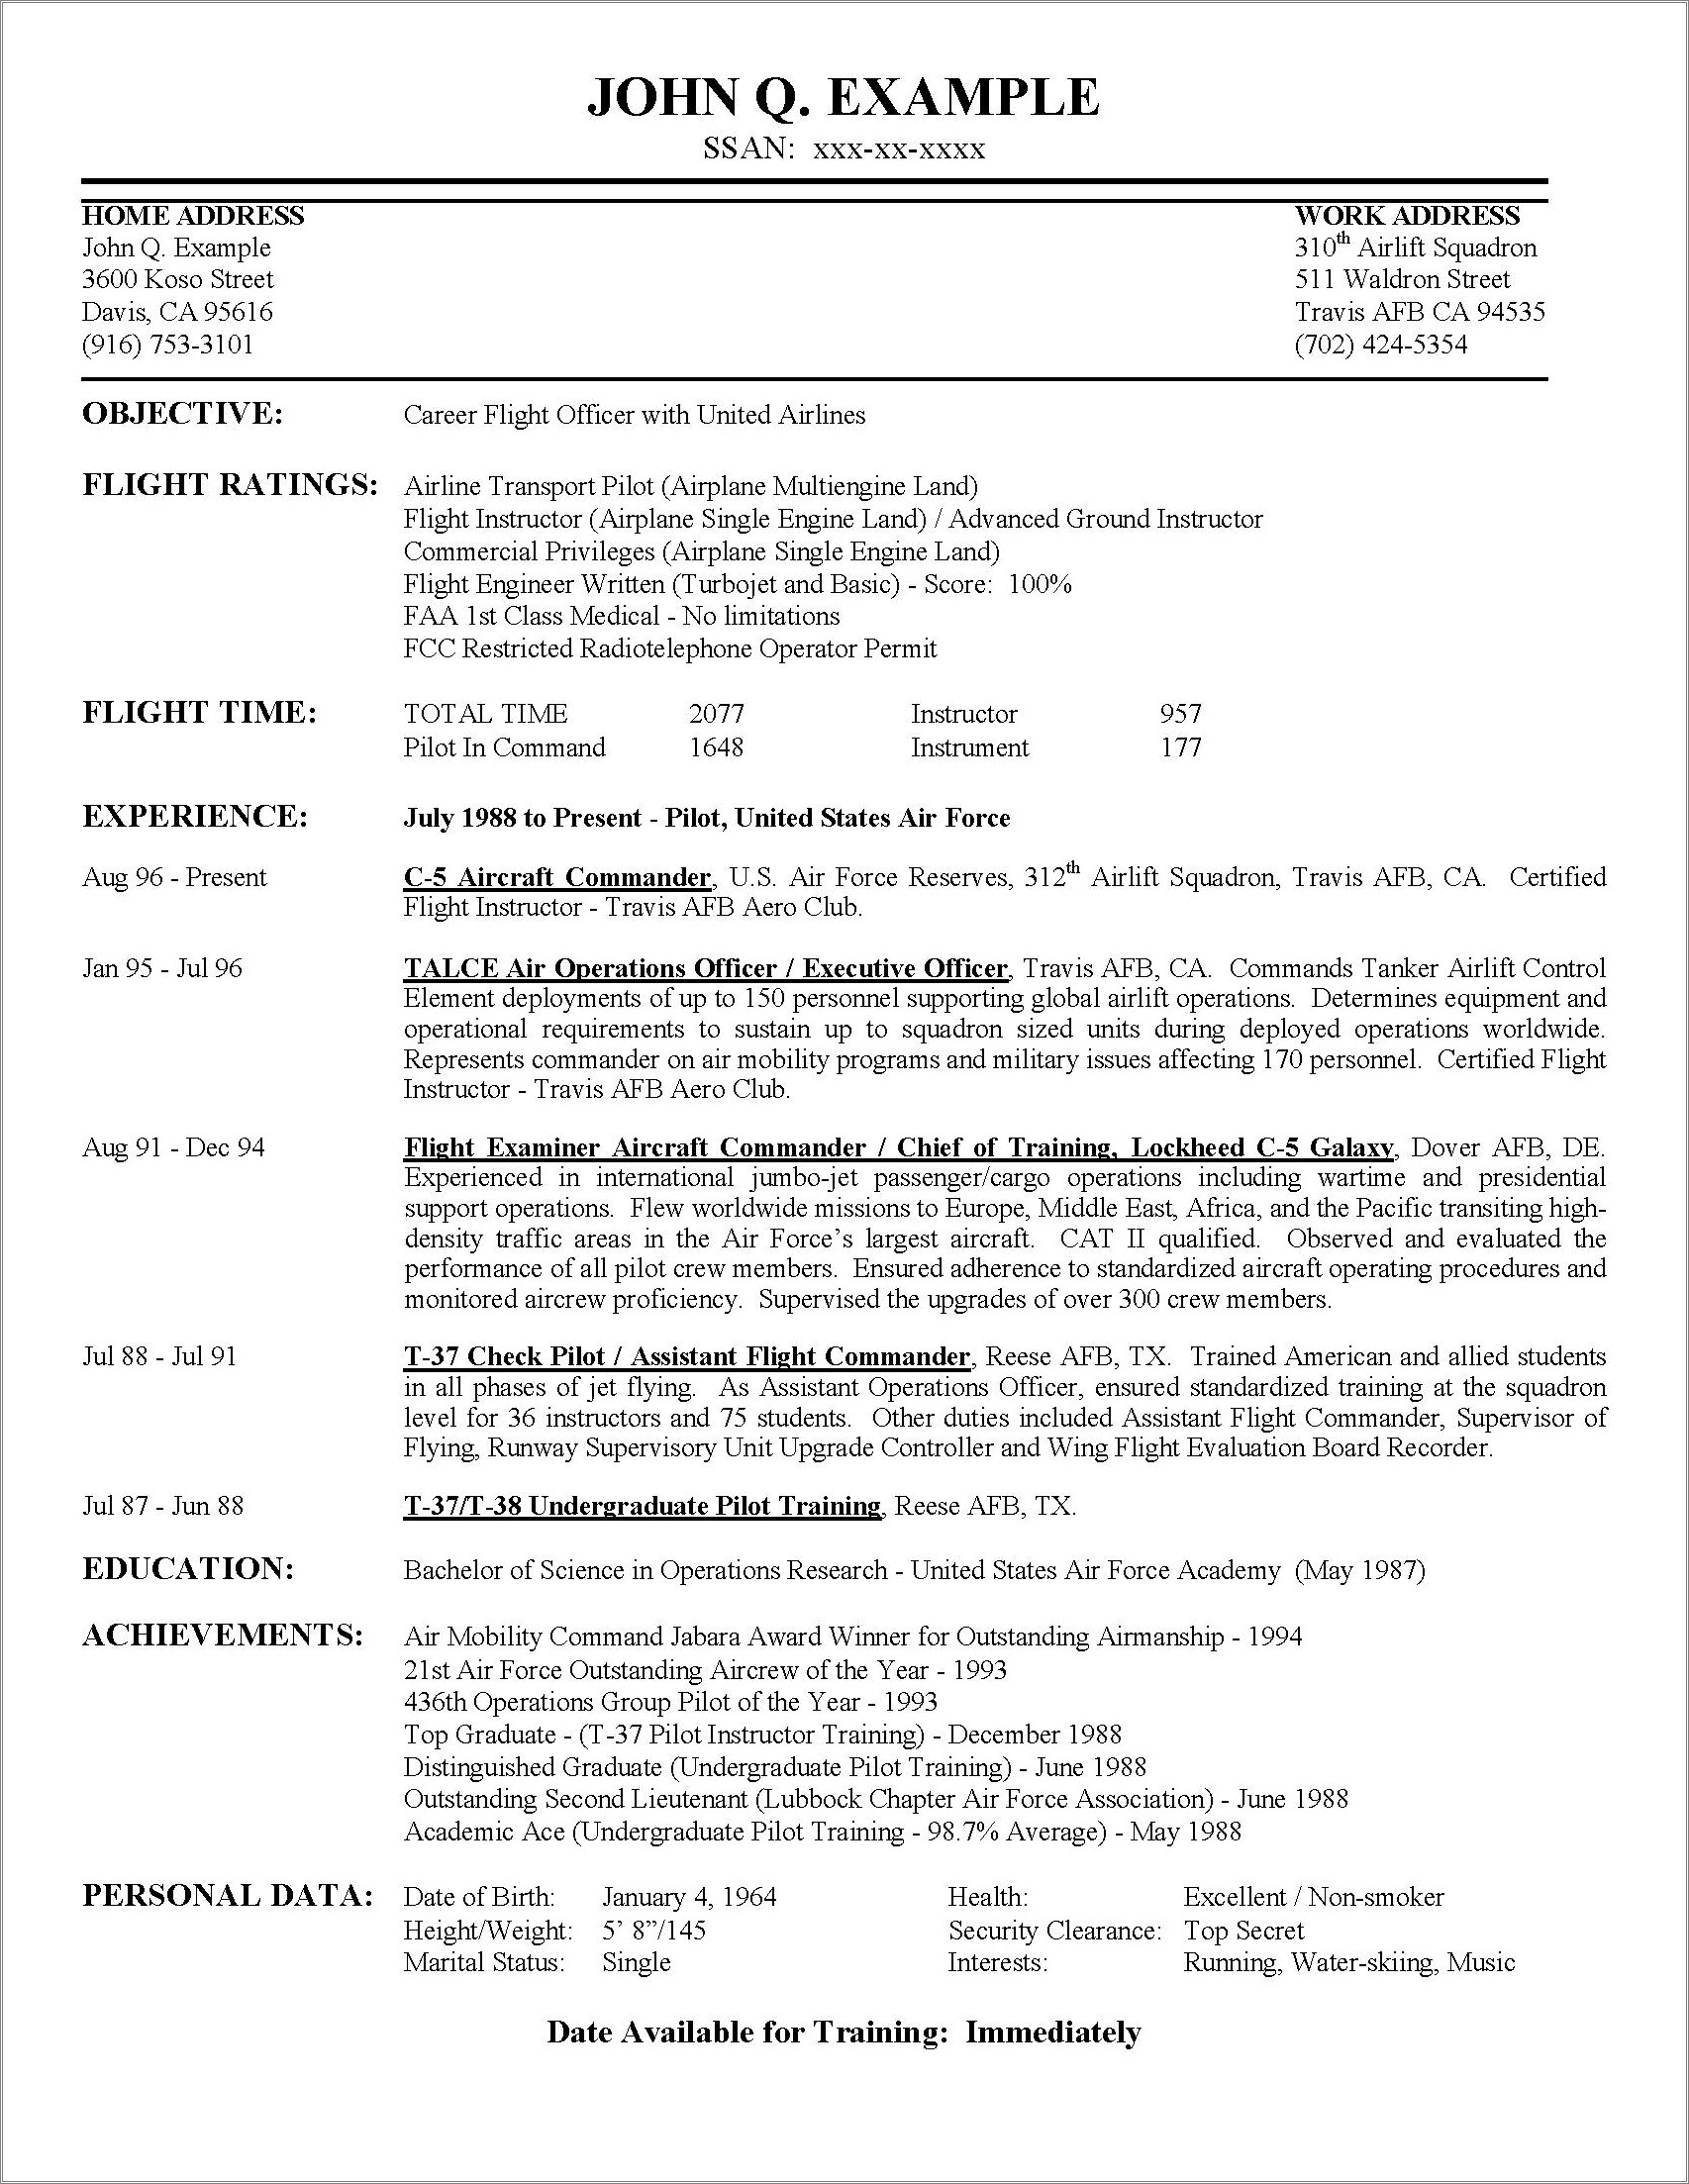 Career Objective In Resume For Airline